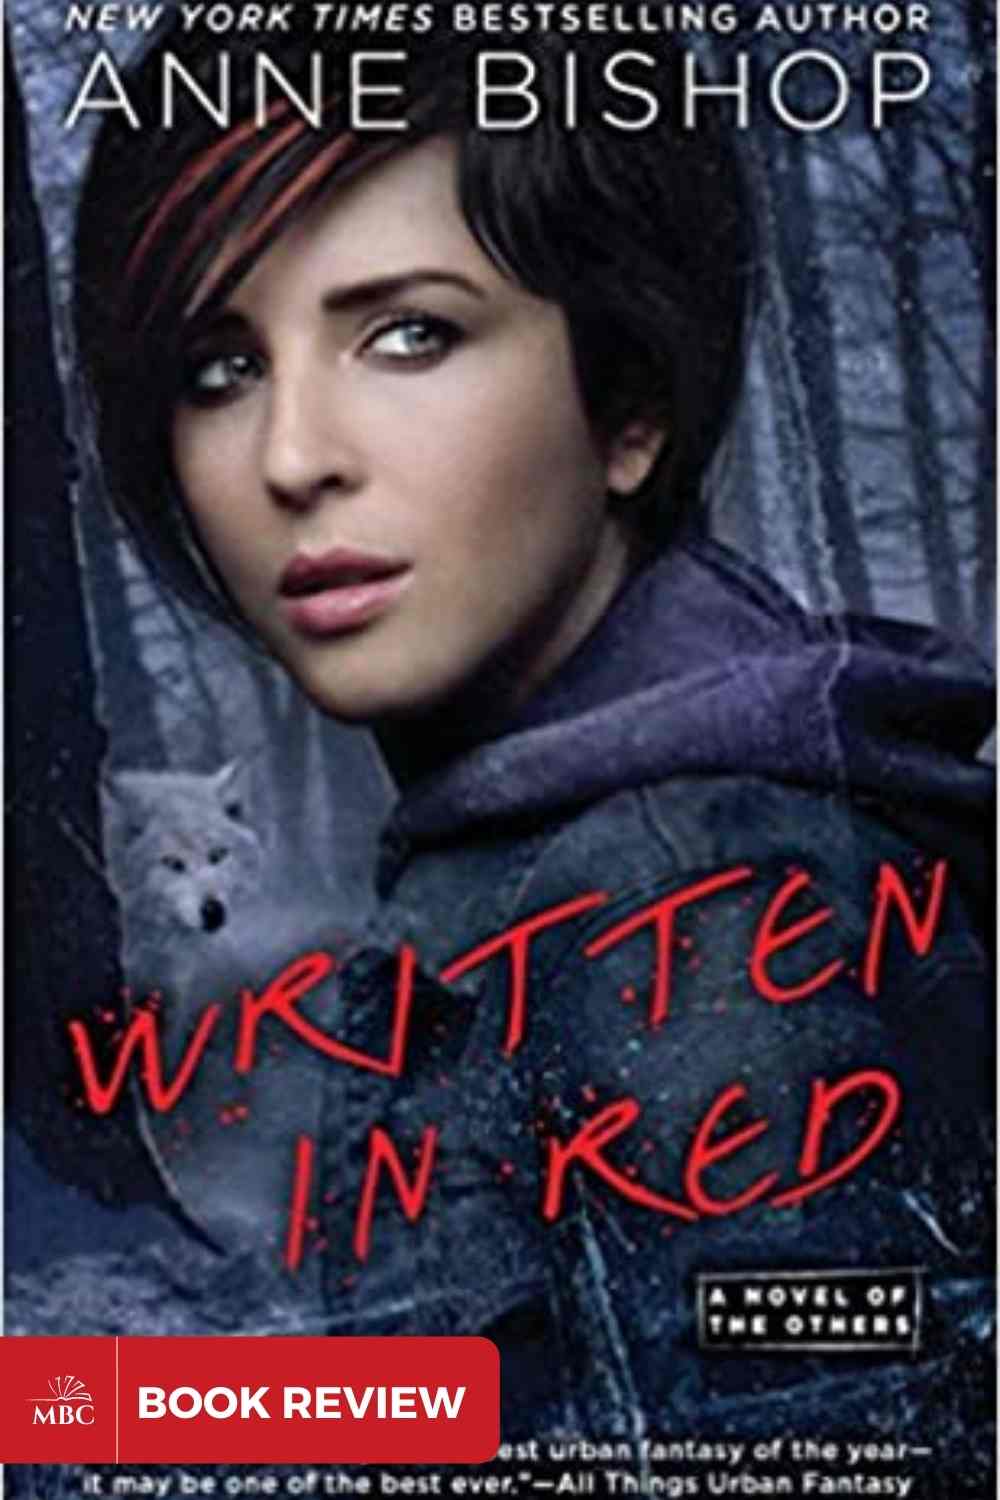 BOOK REVIEW: Written in Red by Anne Bishop